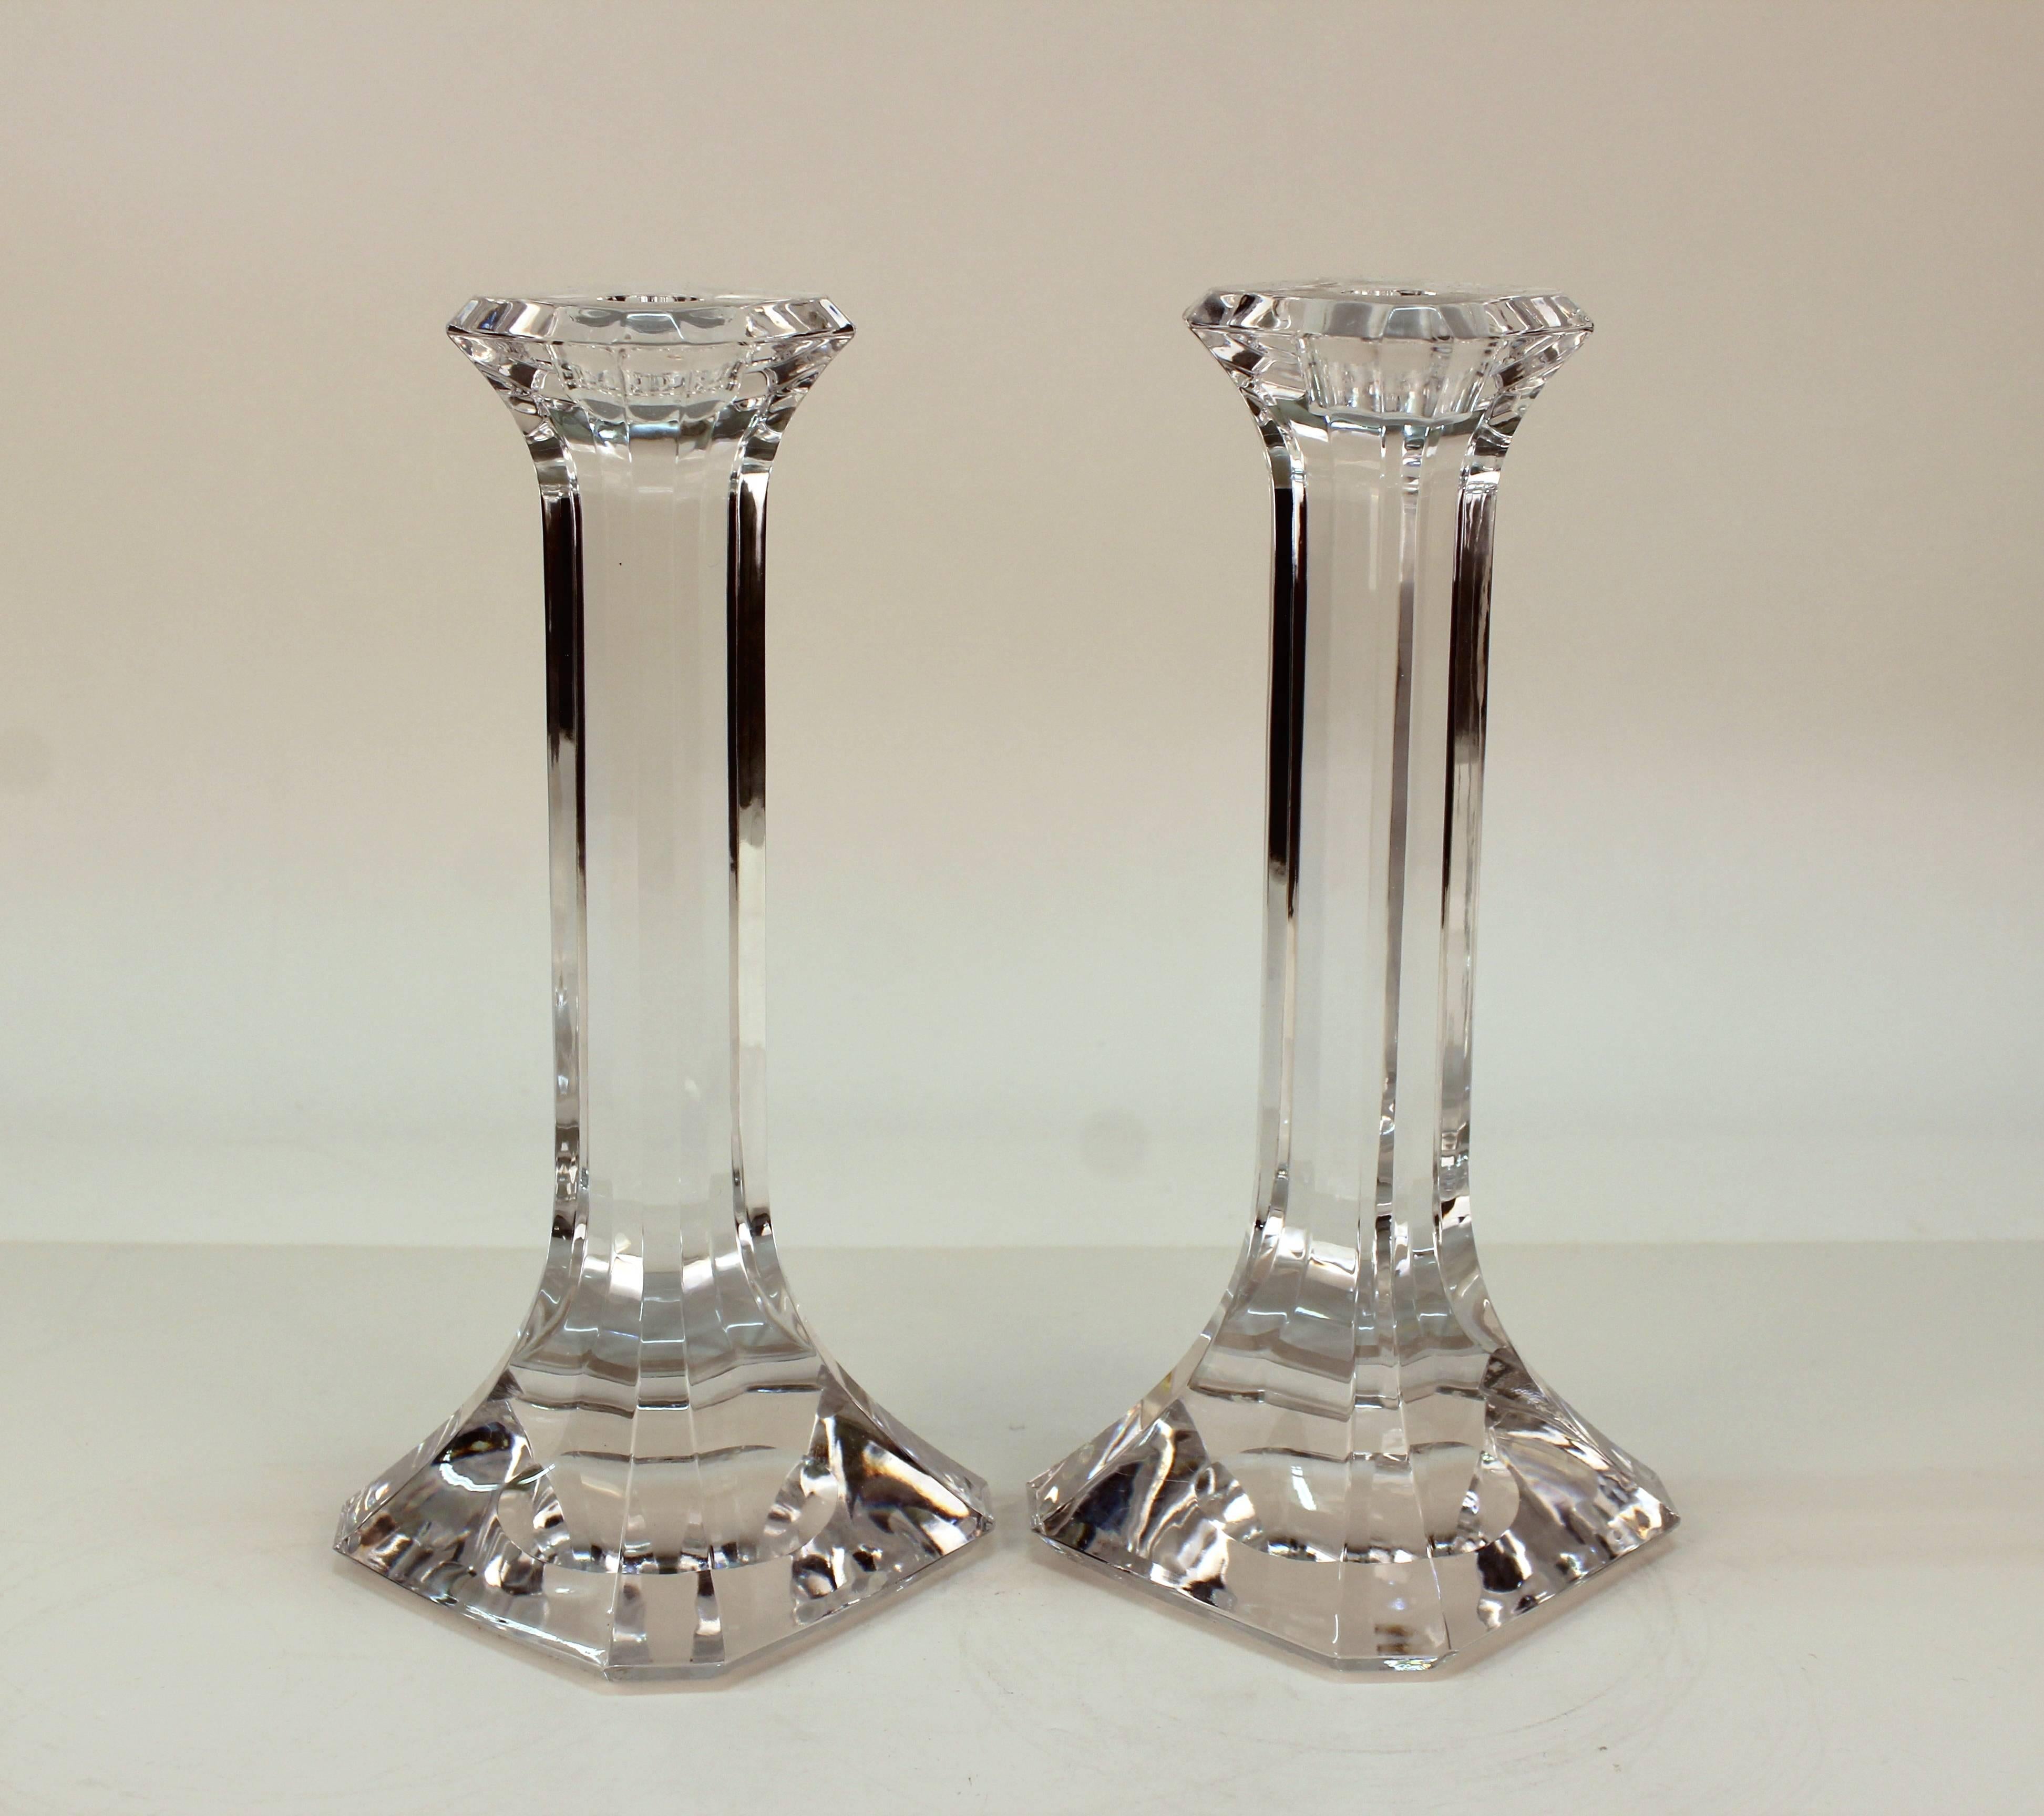 Orrefors Regina candlesticks in clear cut crystal. Features include a faceted column design on square bases. Signed on the bottom. Despite a minor chip to the corner of one candlestick and wear appropriate to use the pair remain in good vintage